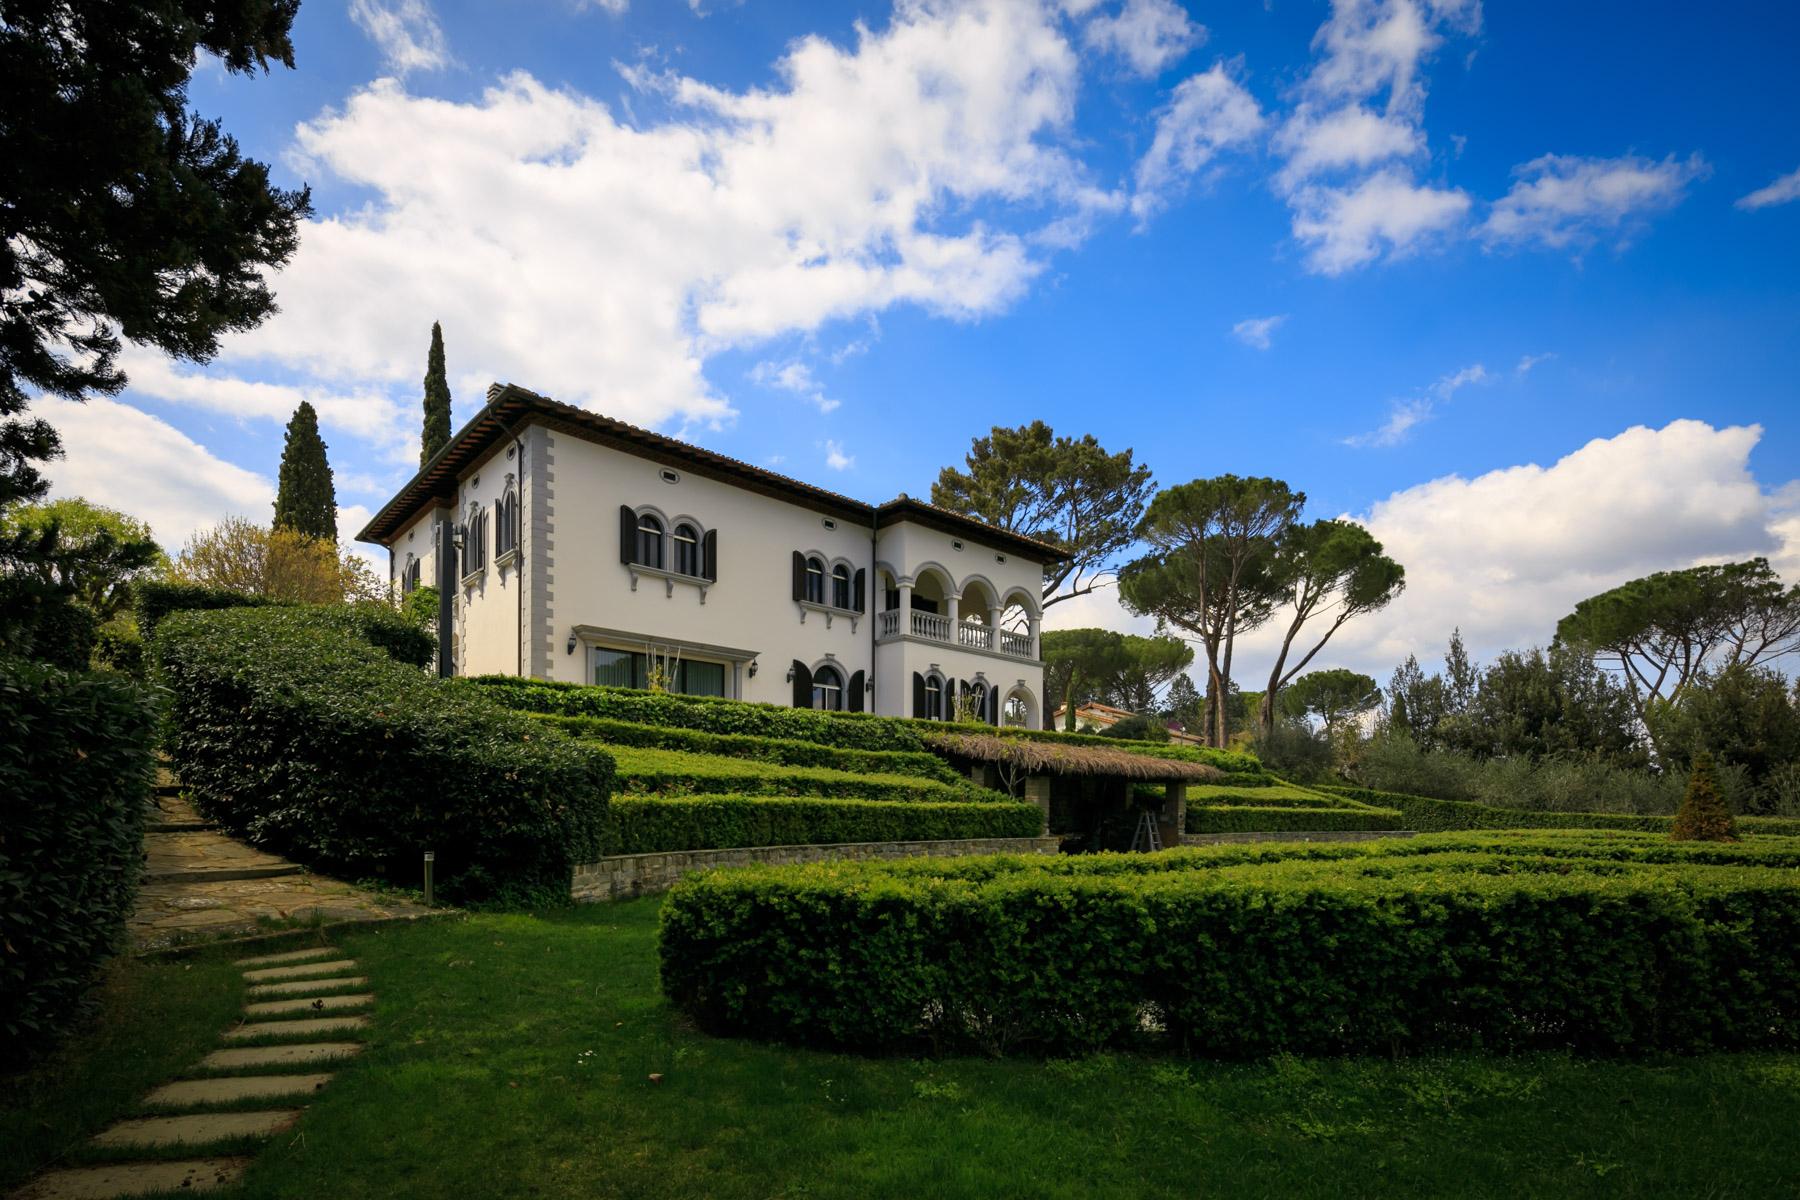 Splendid villa with pool on the Poggio Imperiale hill in Florence - 5